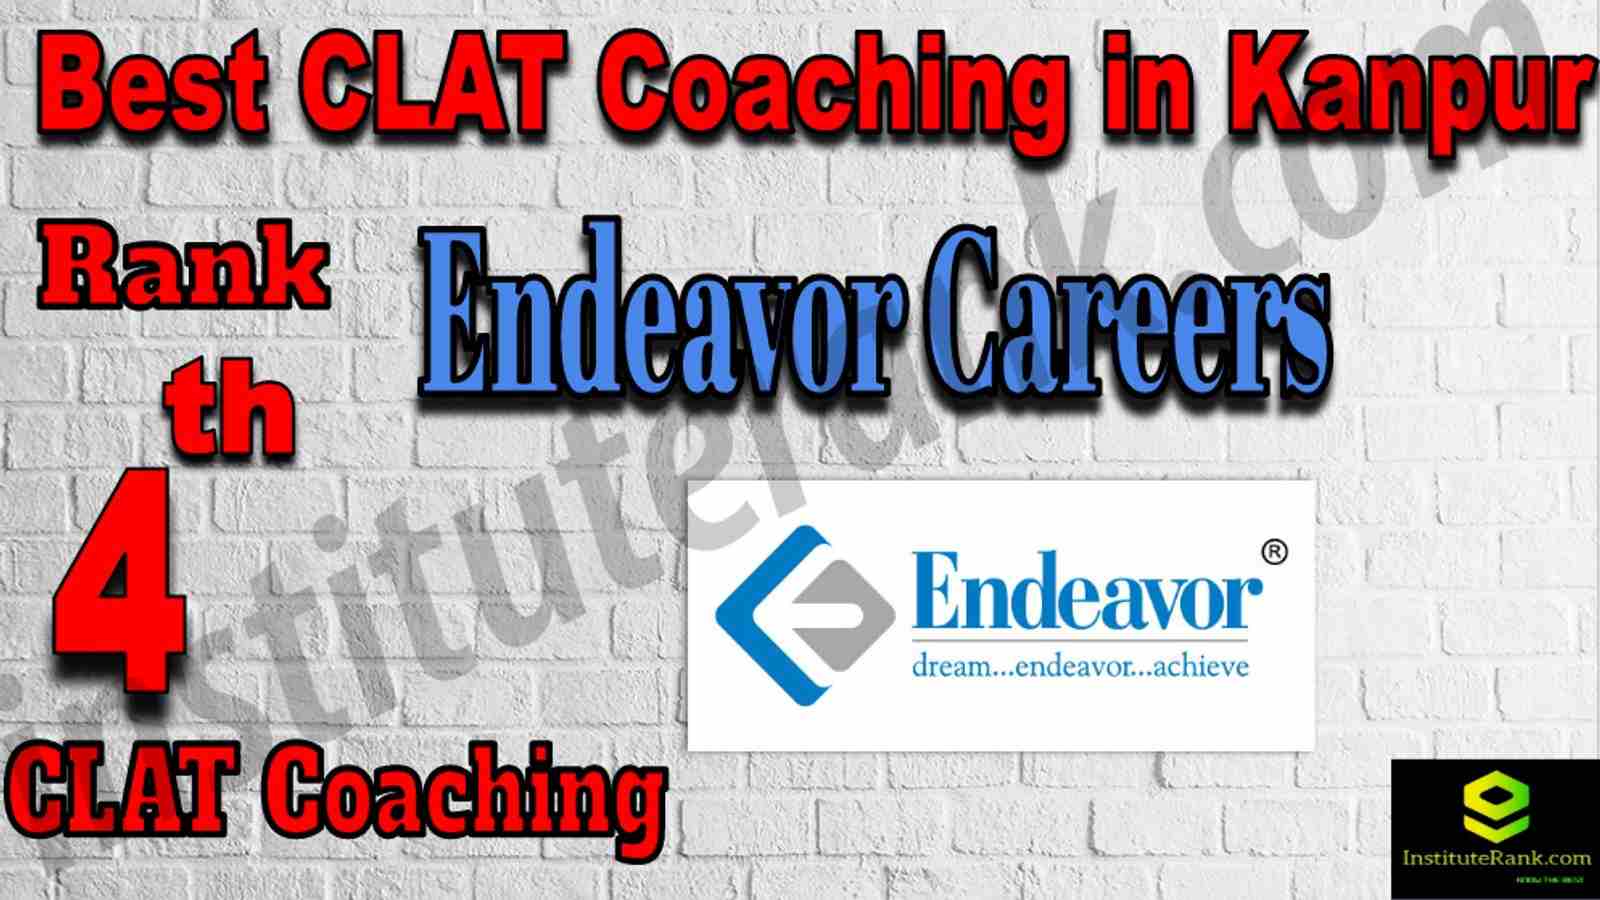 4th Best CLAT Coaching in Kanpur